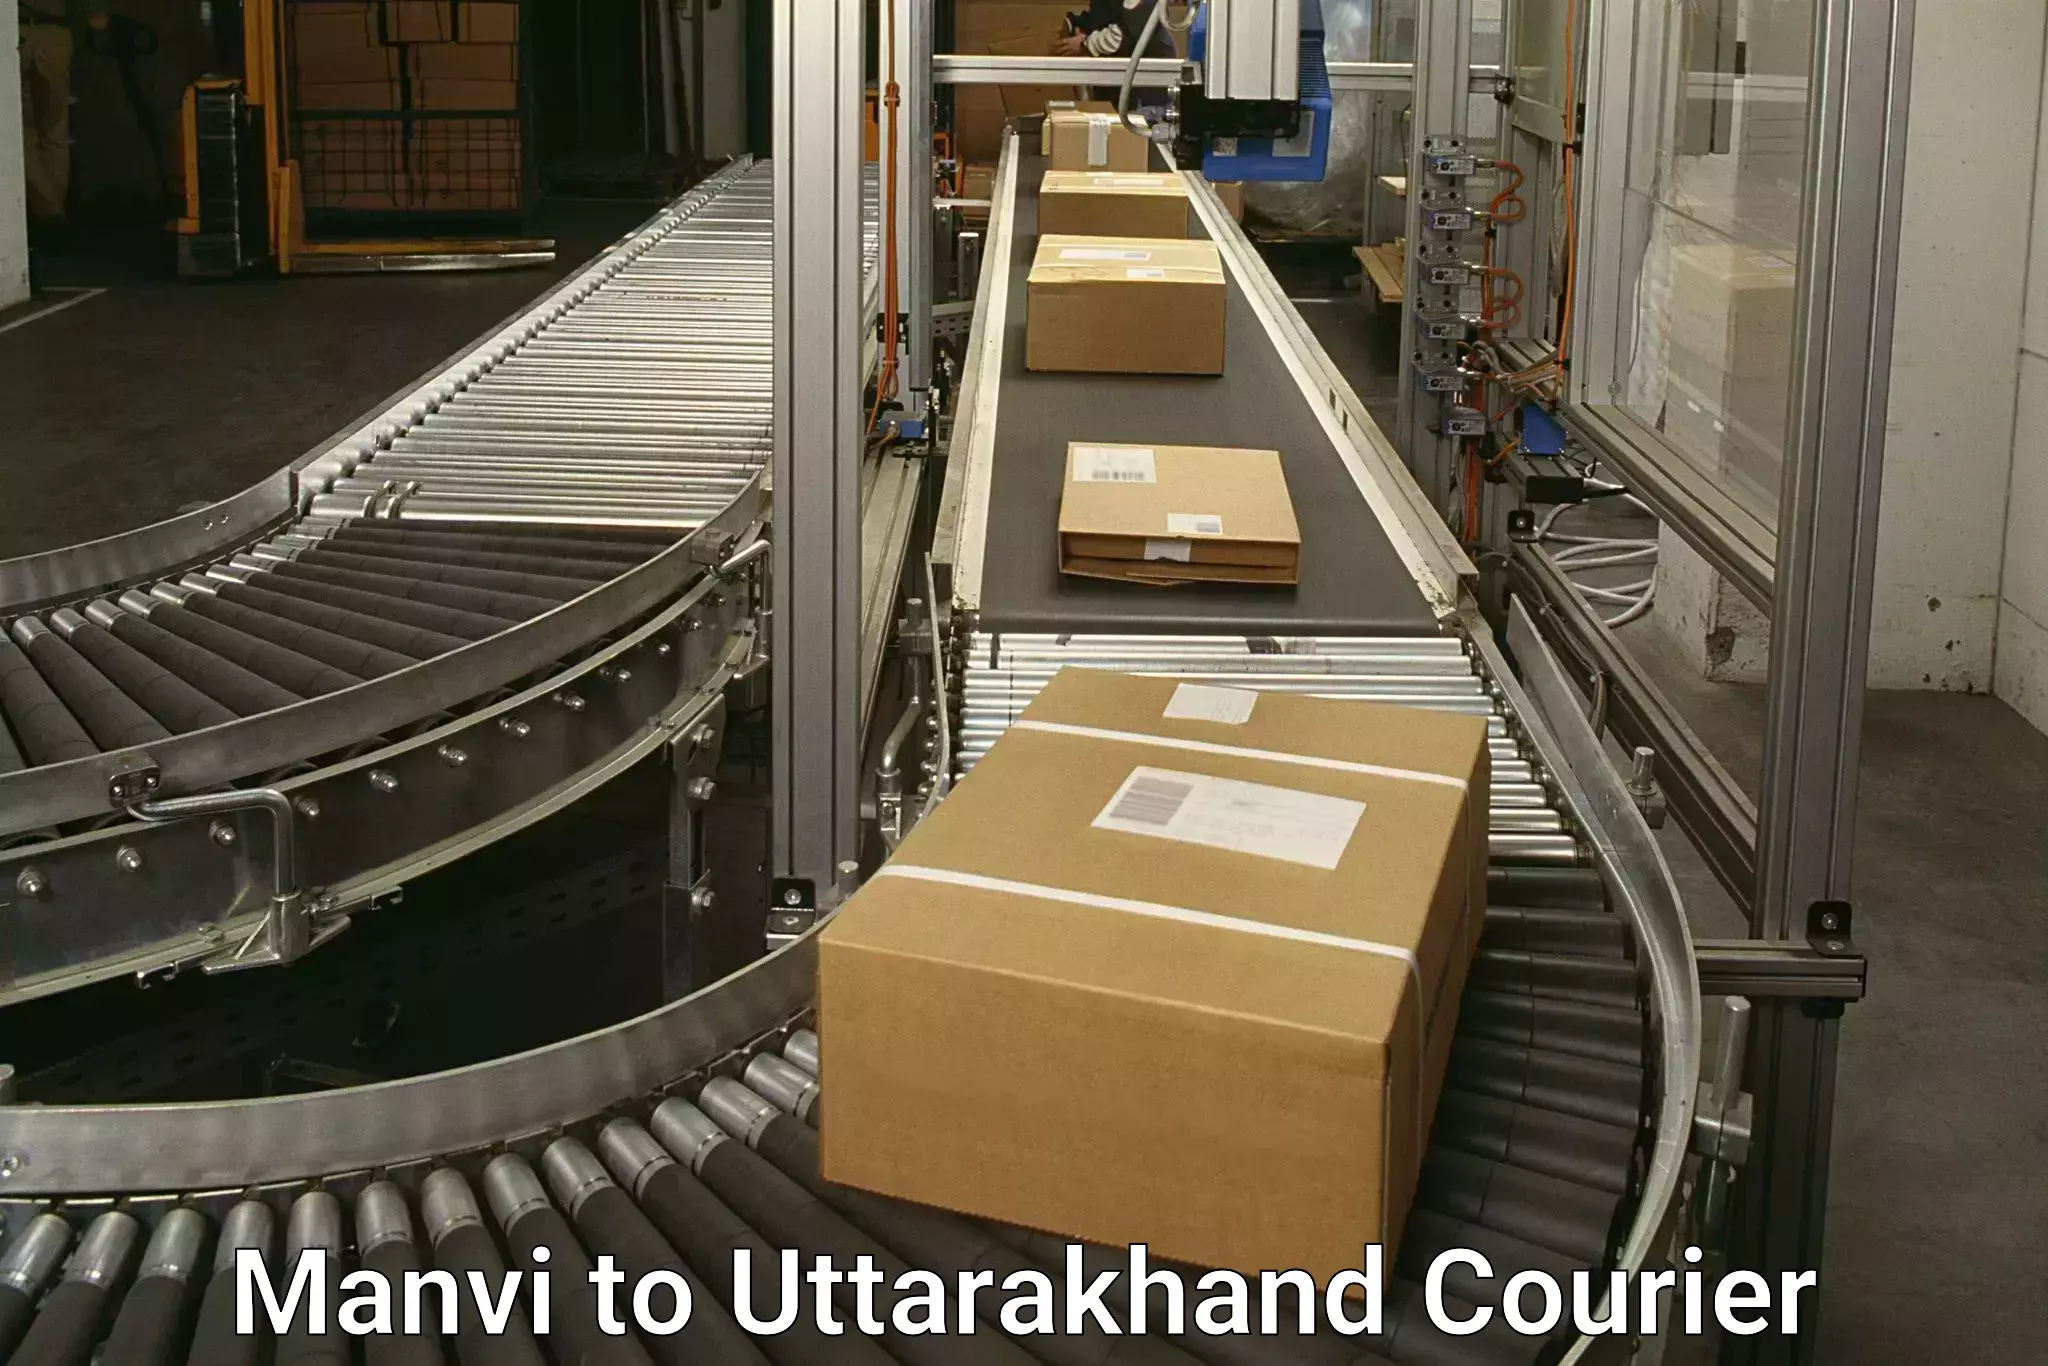 Courier service booking Manvi to Doiwala